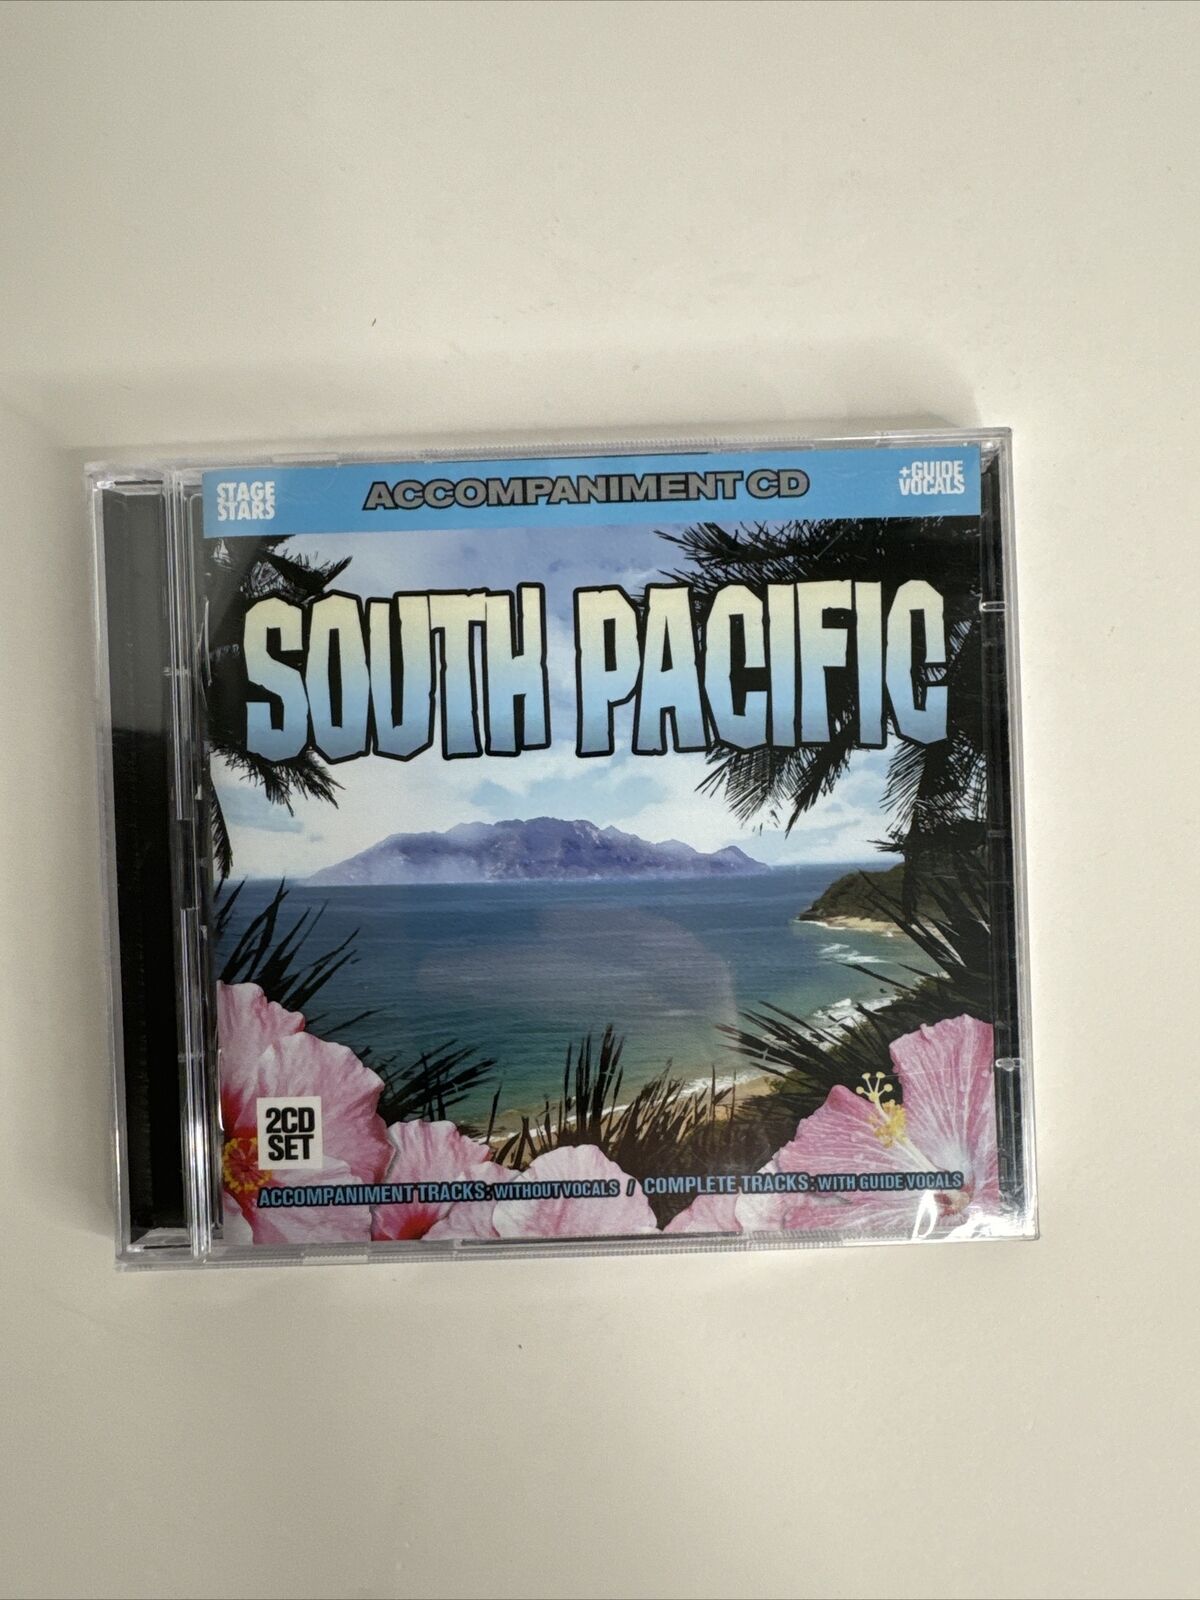 south pacific accompaniment cd Plus Guide Vocals - Very Rare - New Sealed